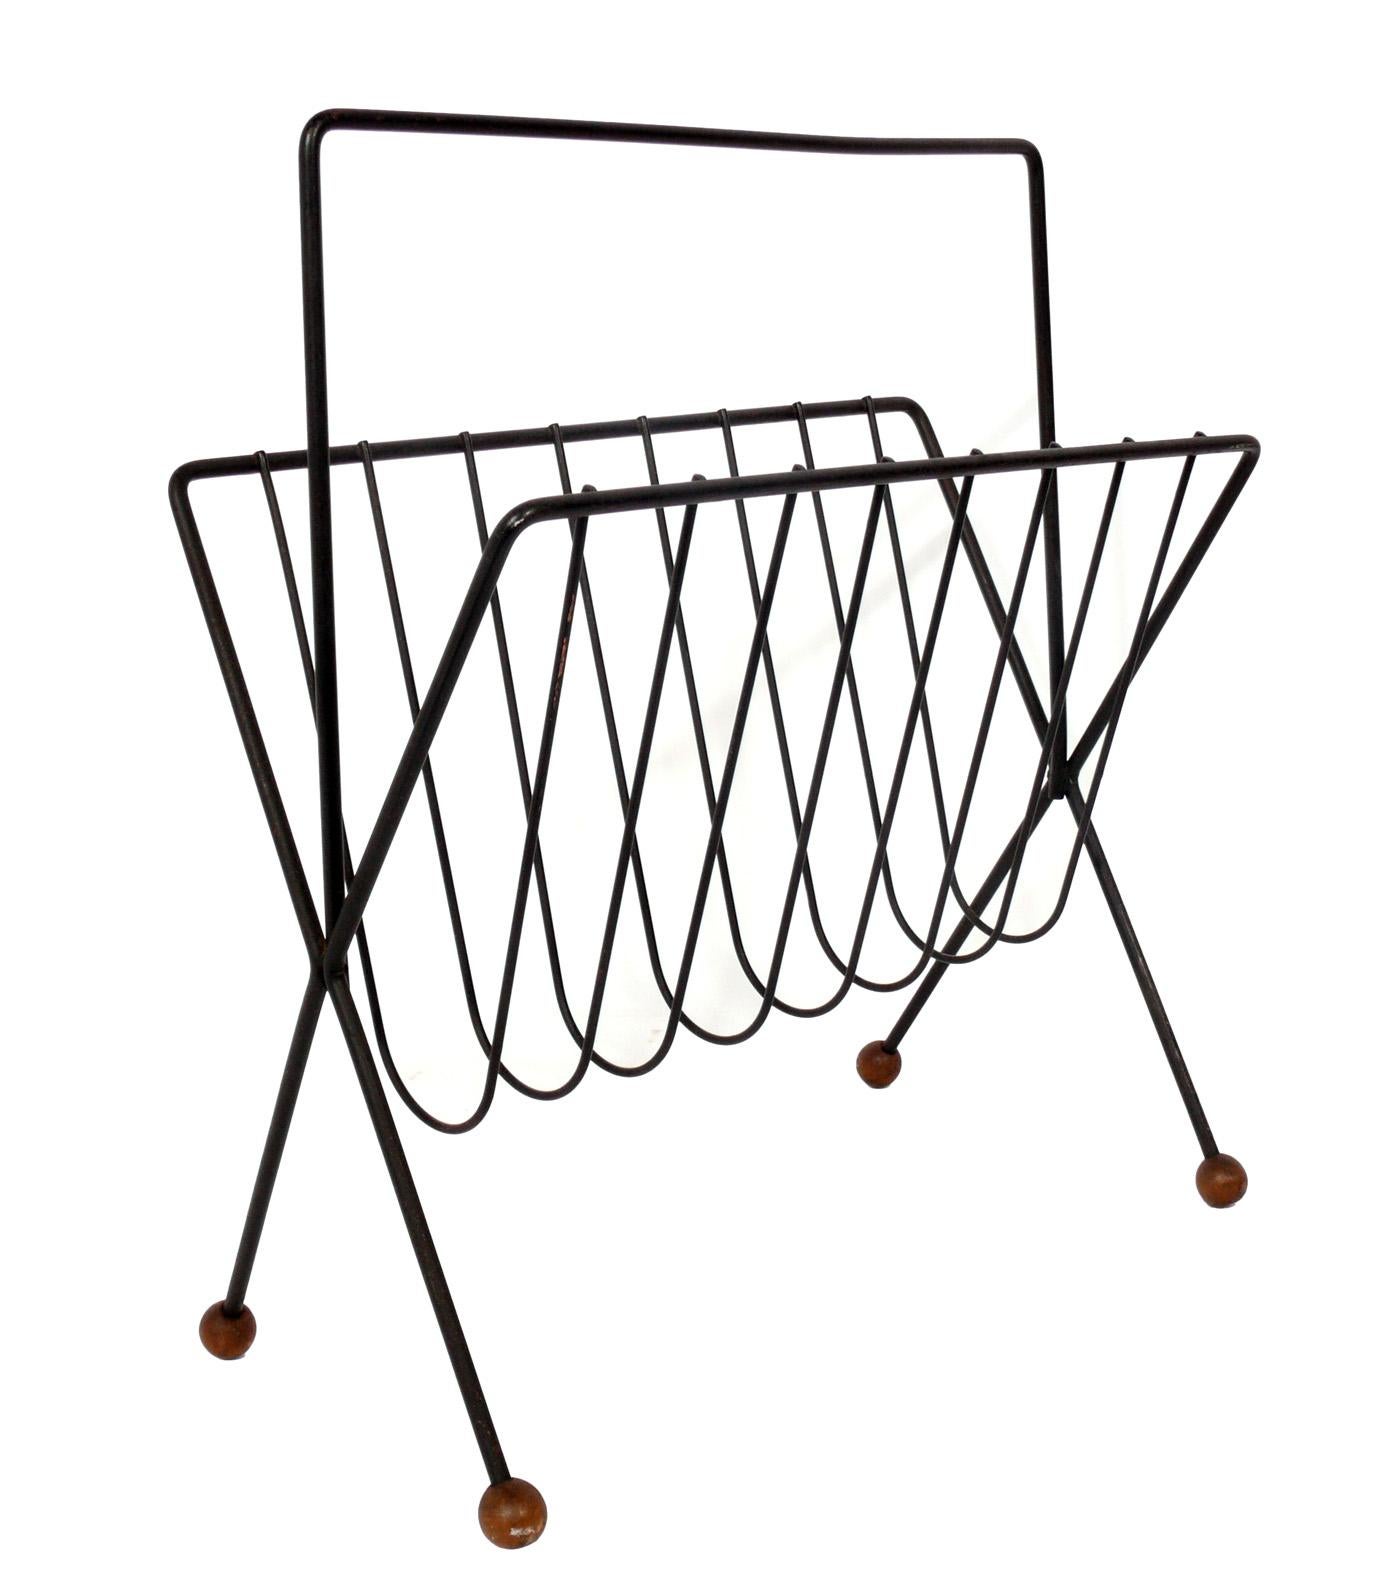 Selection of Mid-Century Modern magazine racks, circa 1950s. They are:
1) Sculptural iron magazine rack, designed by Tony Paul, seen at the left. It measures 20.25